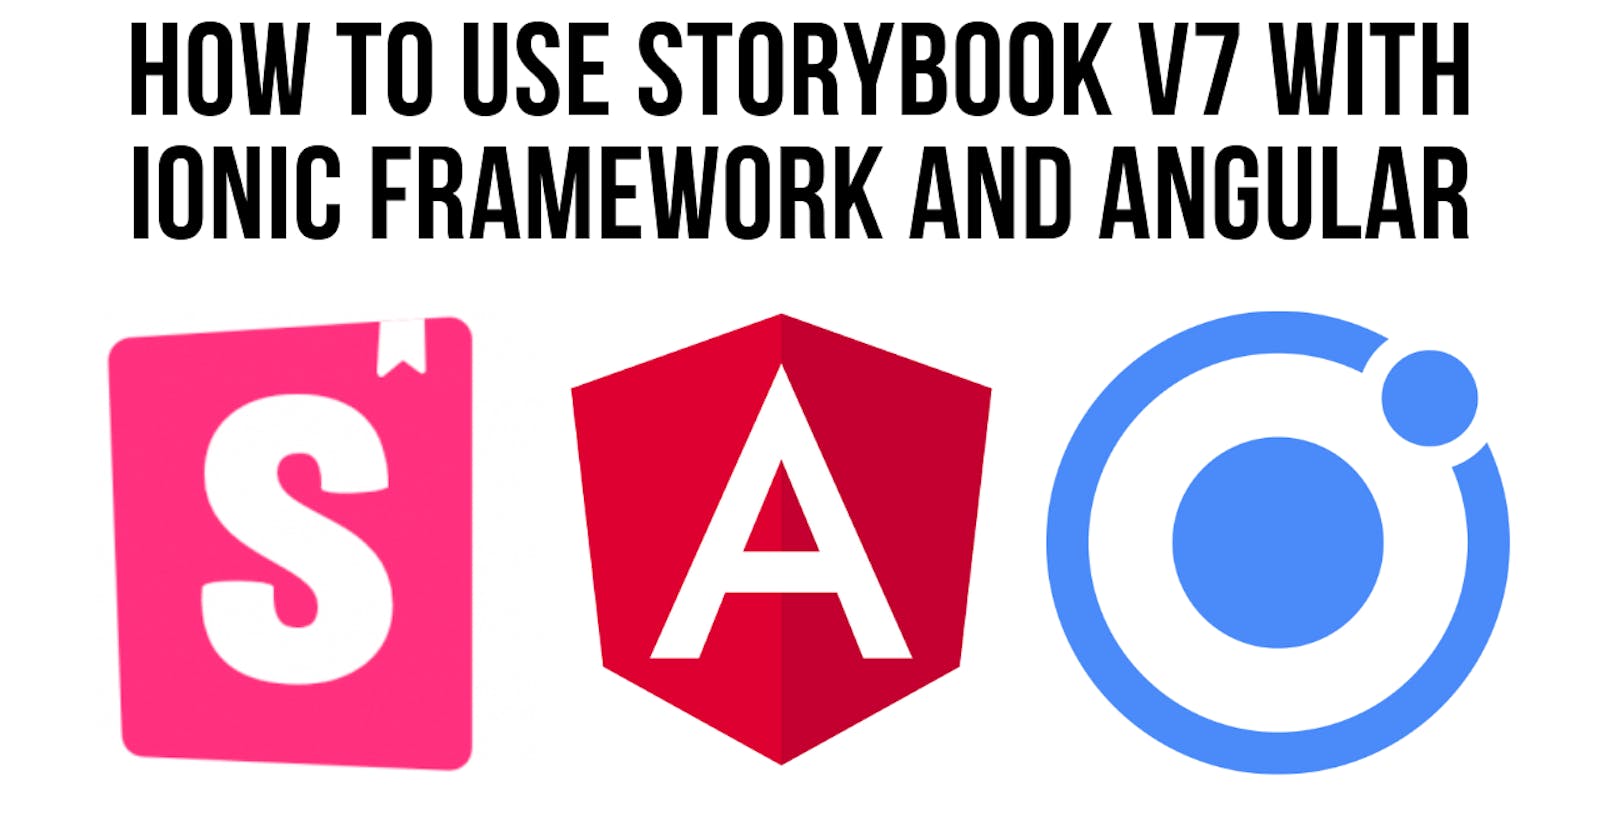 How To Use Storybook v7 With Ionic Framework And Angular